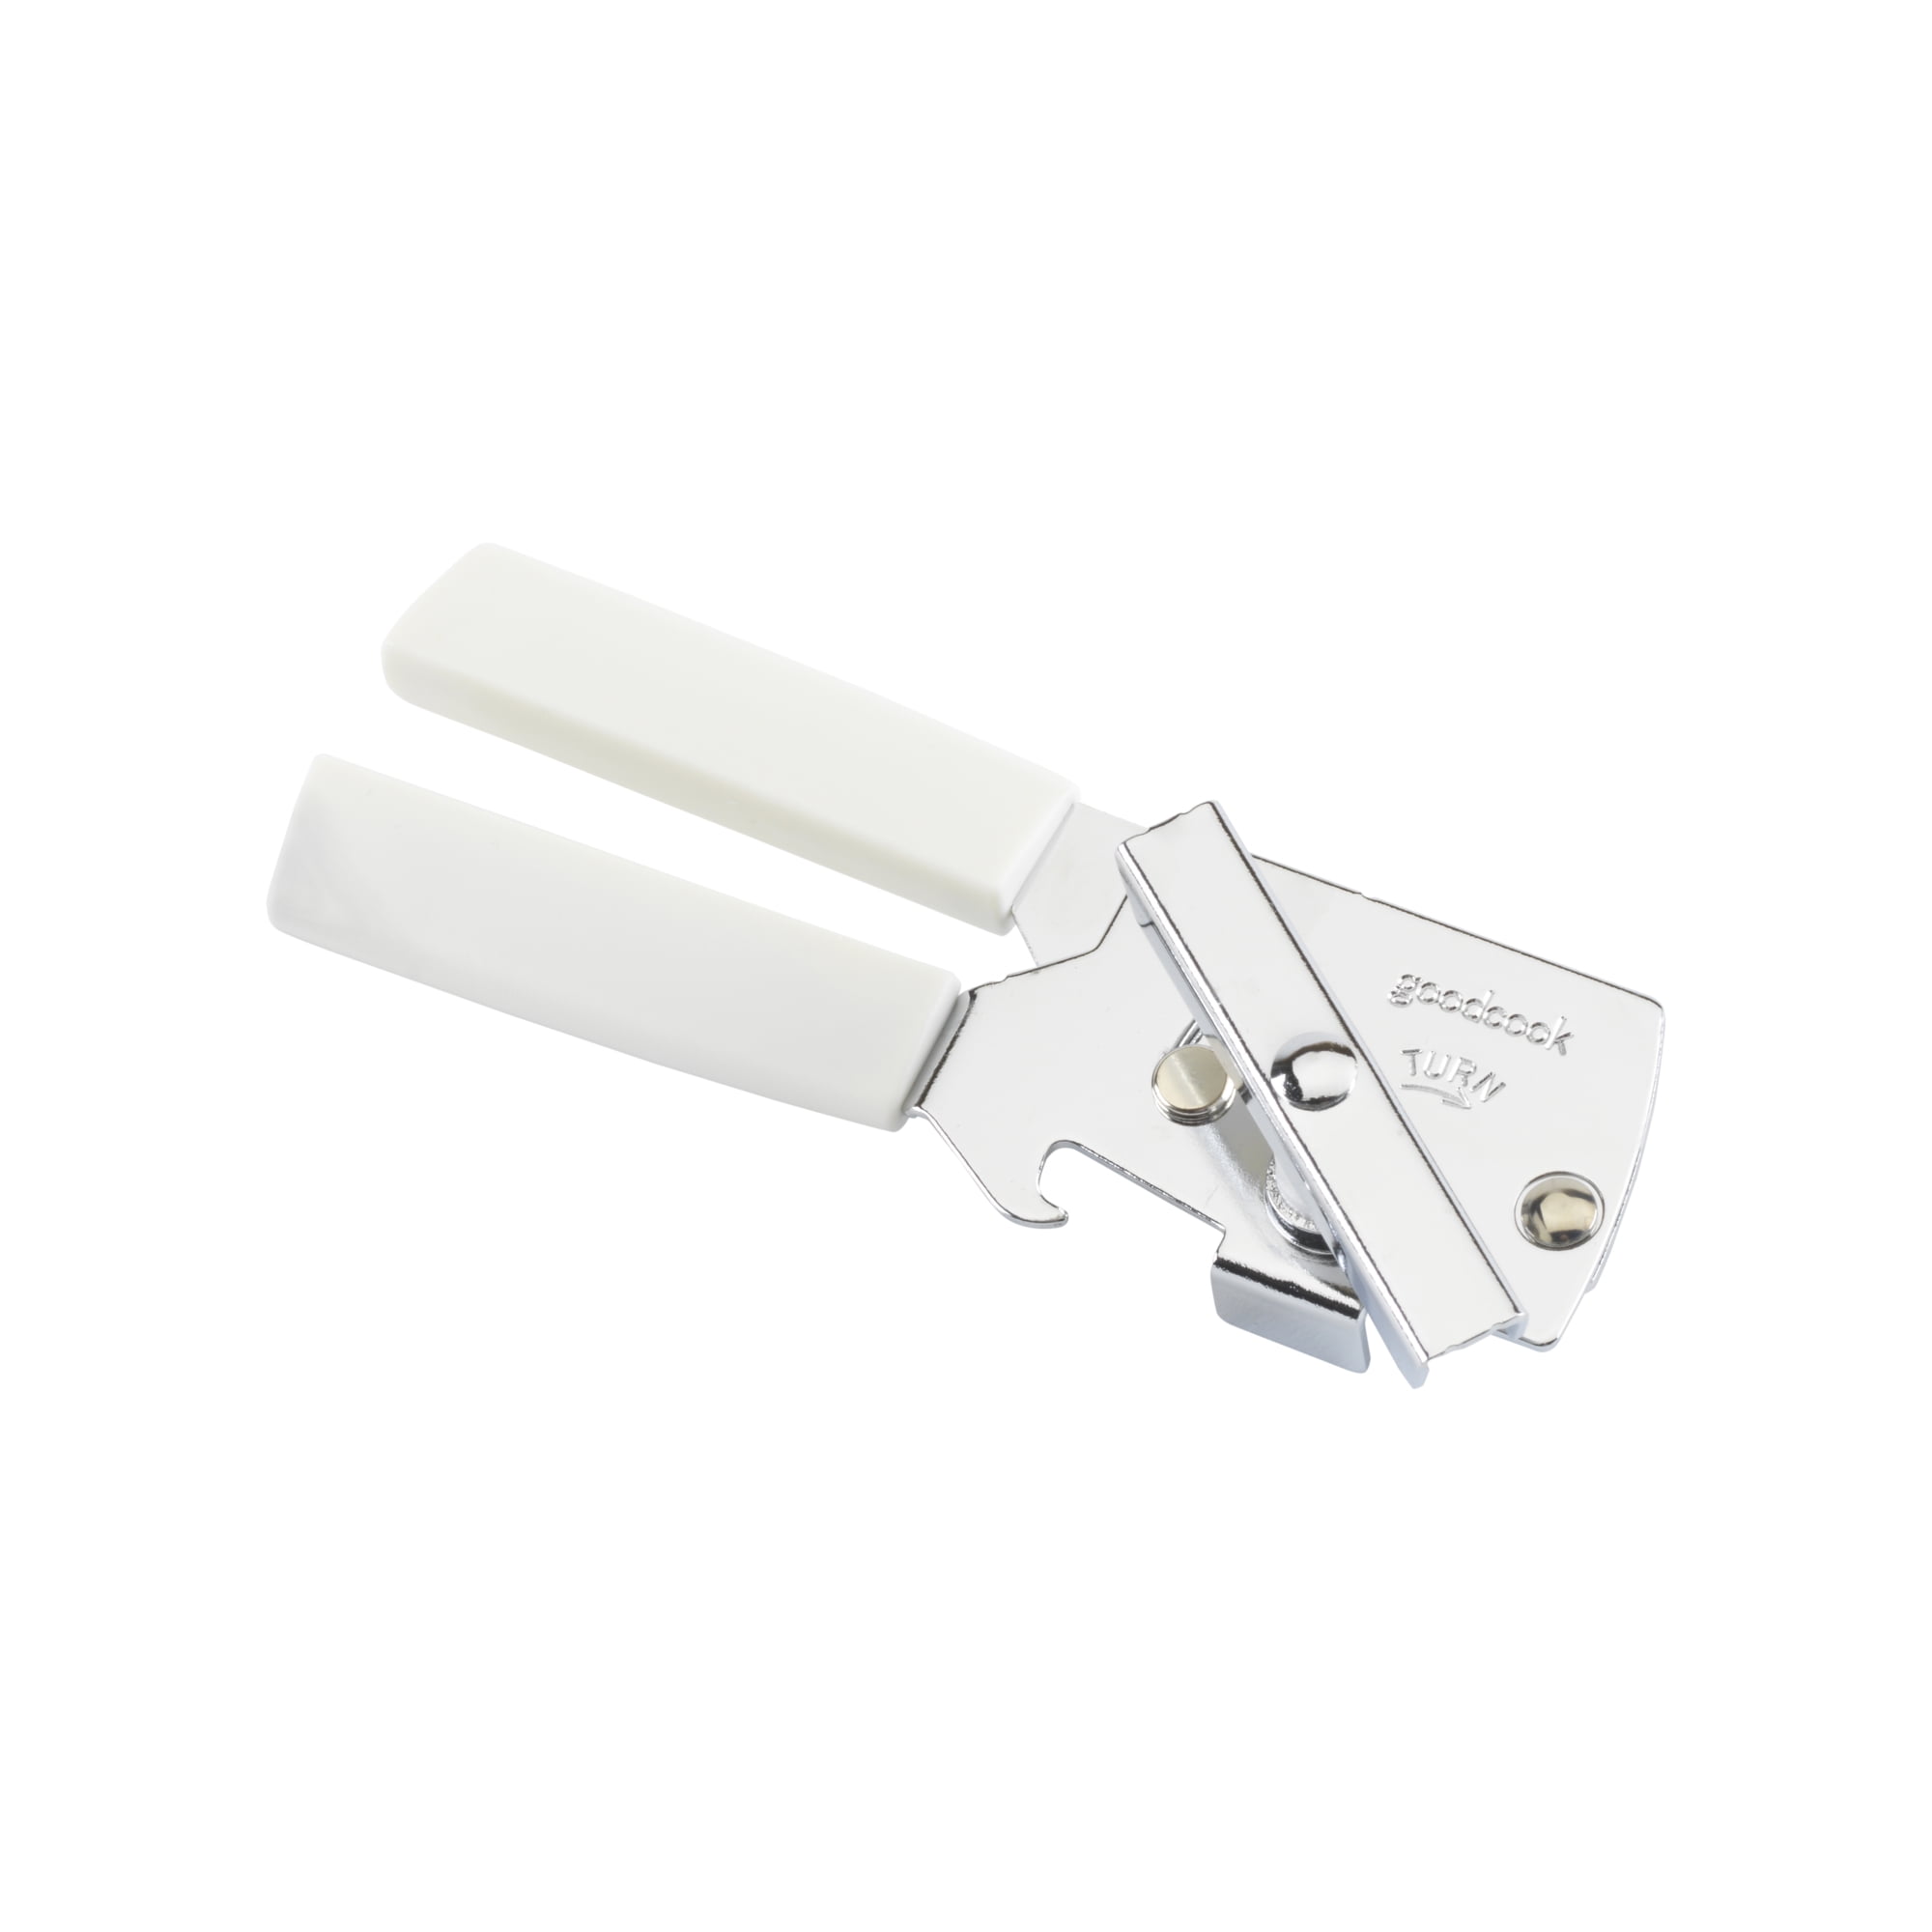 CHEF CRAFT CAN OPENER - Compact size – TheFullValue, General Store